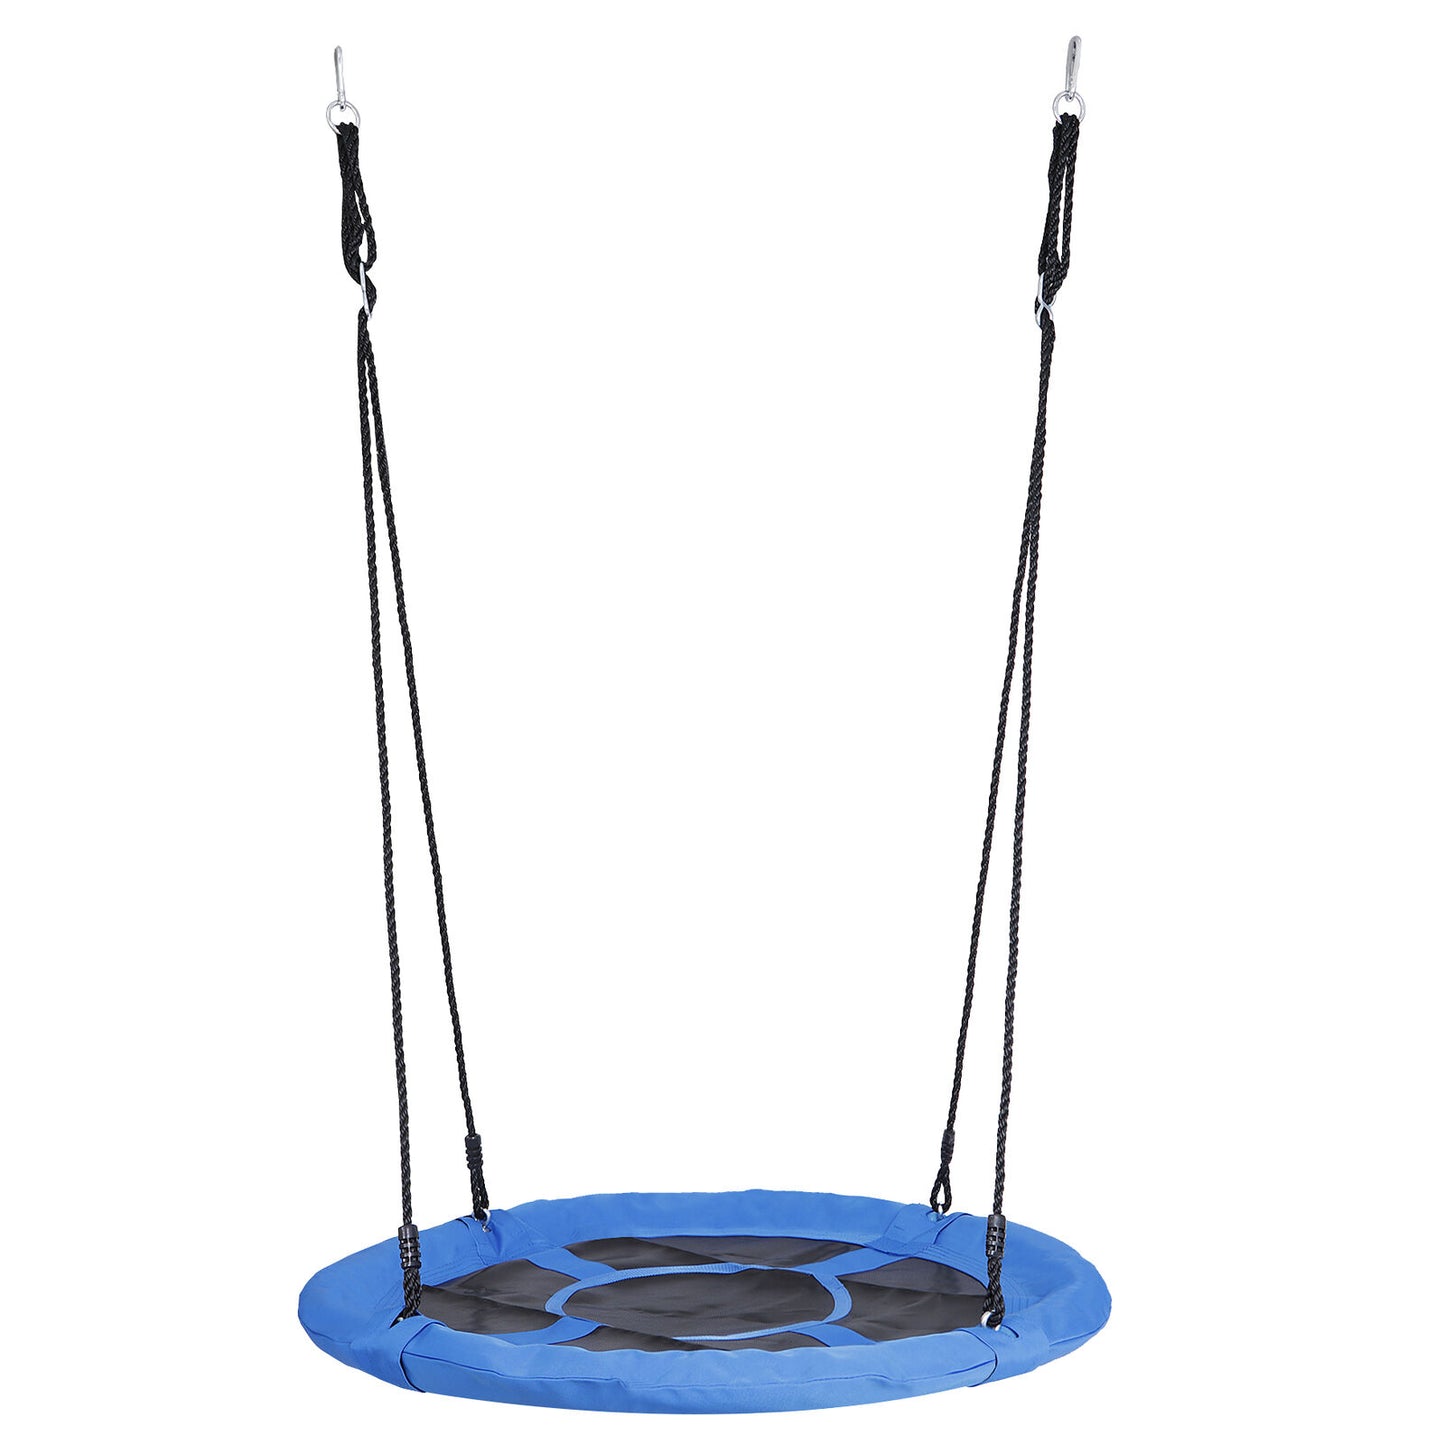 40"Round Blue Saucer Tree Swing 900D Oxford Waterproof Max 800Lbs W/Hanging Rope